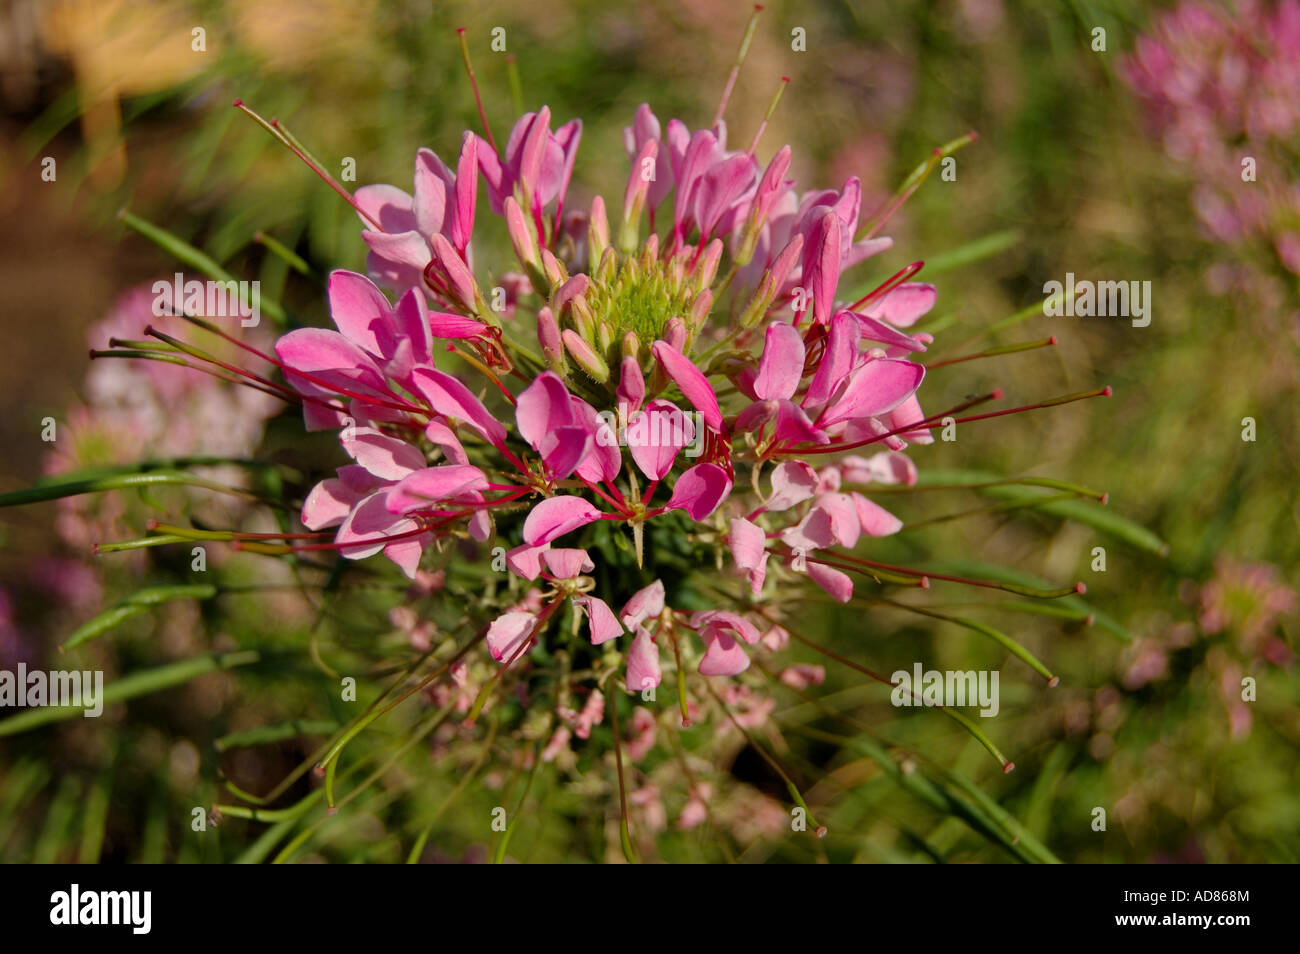 Violet Rose Queen cleome or spider flower plant Cleome hassleriana Stock Photo